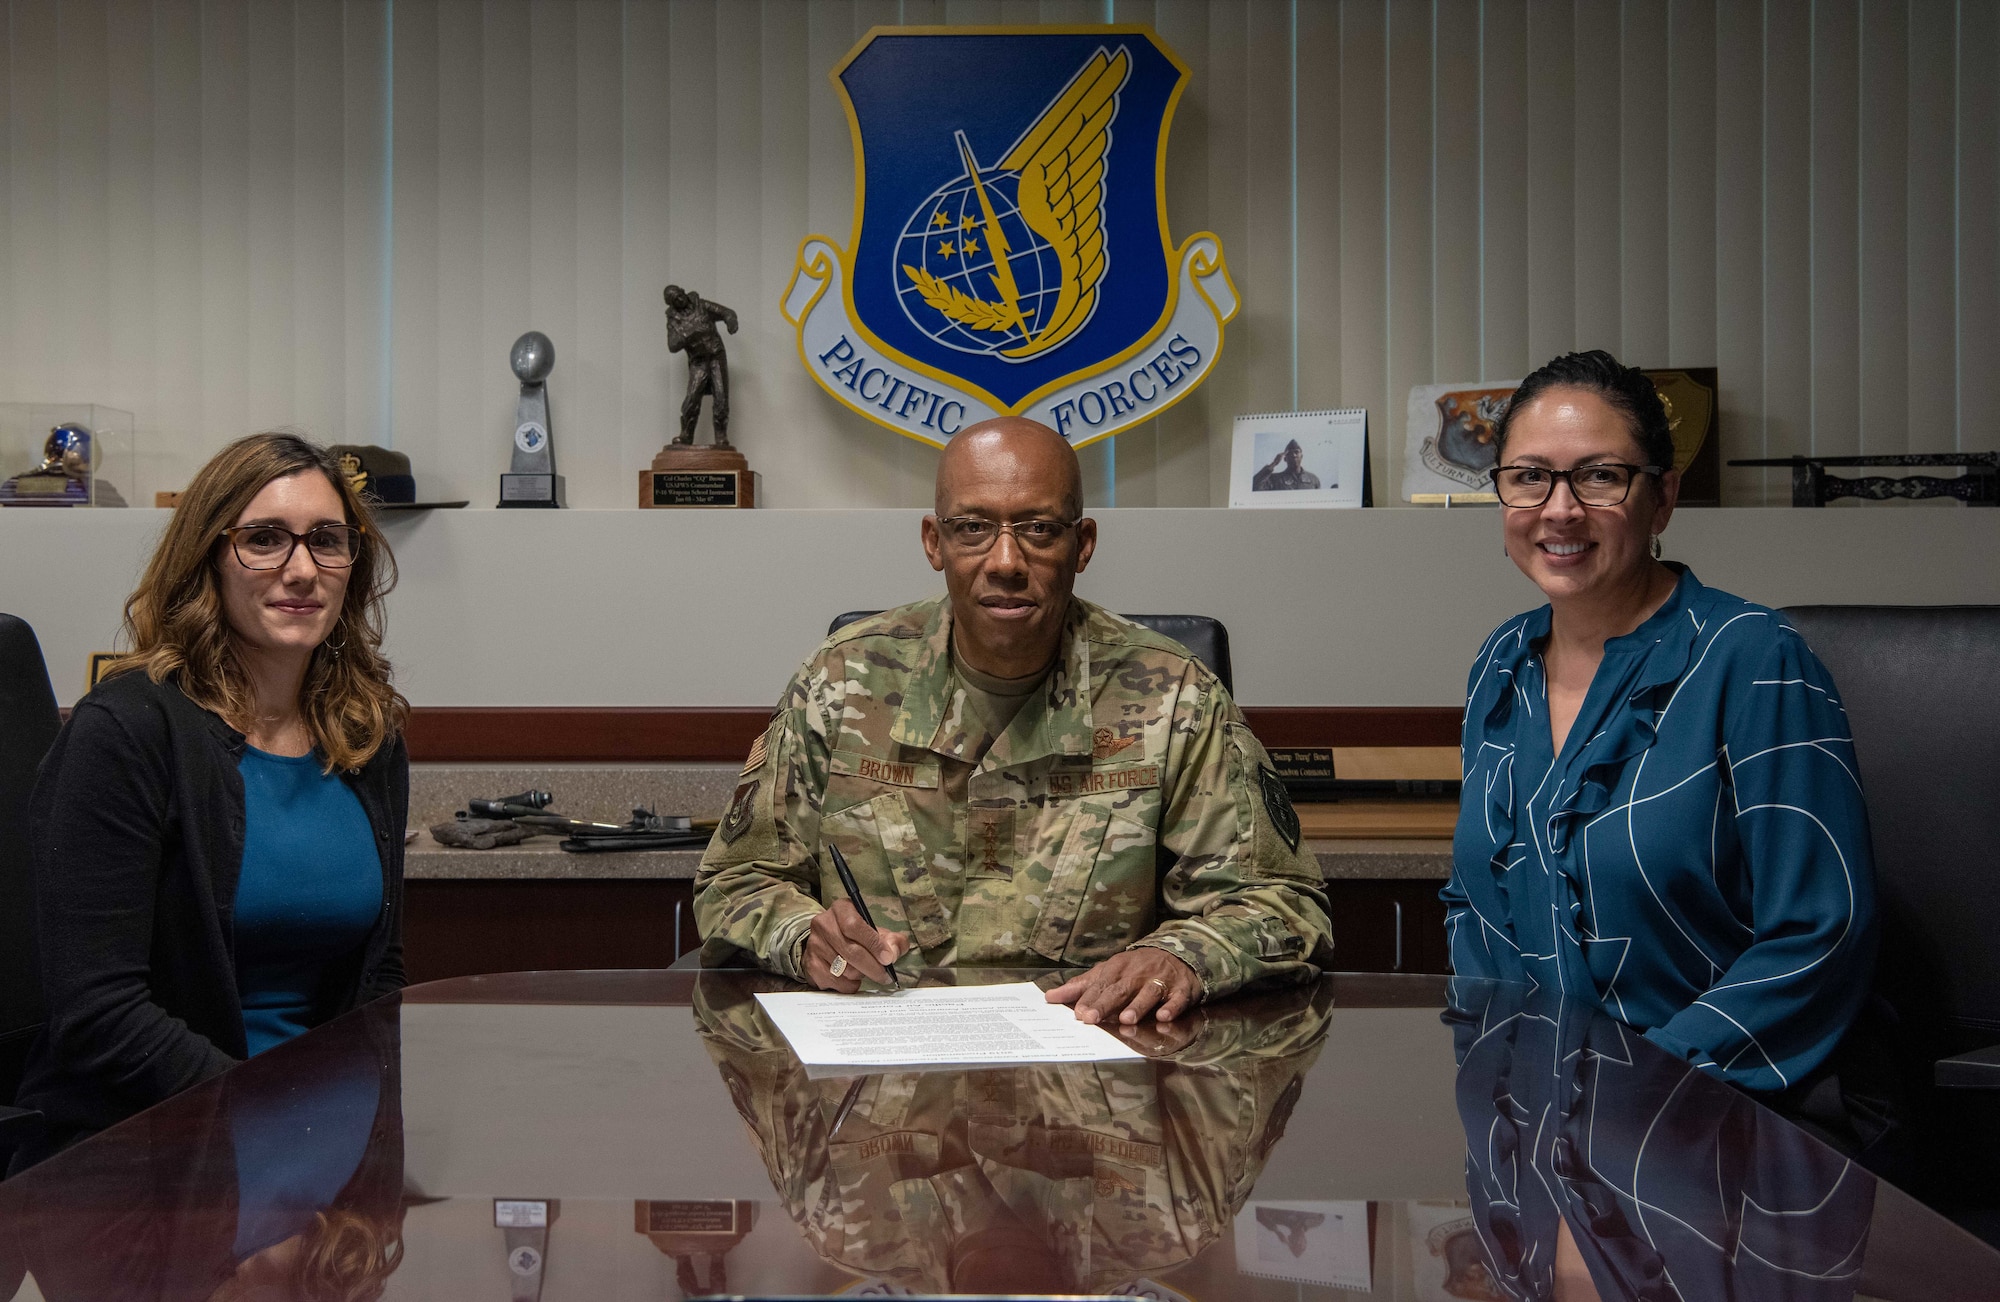 Gen. CQ Brown, Jr., Pacific Air Forces commander, poses for a photo with Abigail Cutter, Pacific Air Forces Deputy Sexual Assault response coordinator (left), and Dr. Lisa Charles, Pacific Air Forces Sexual Assault Prevention and Response program manager (right), at Joint Base Pearl Harbor-Hickam, Hawaii, Mar. 11, 2019.